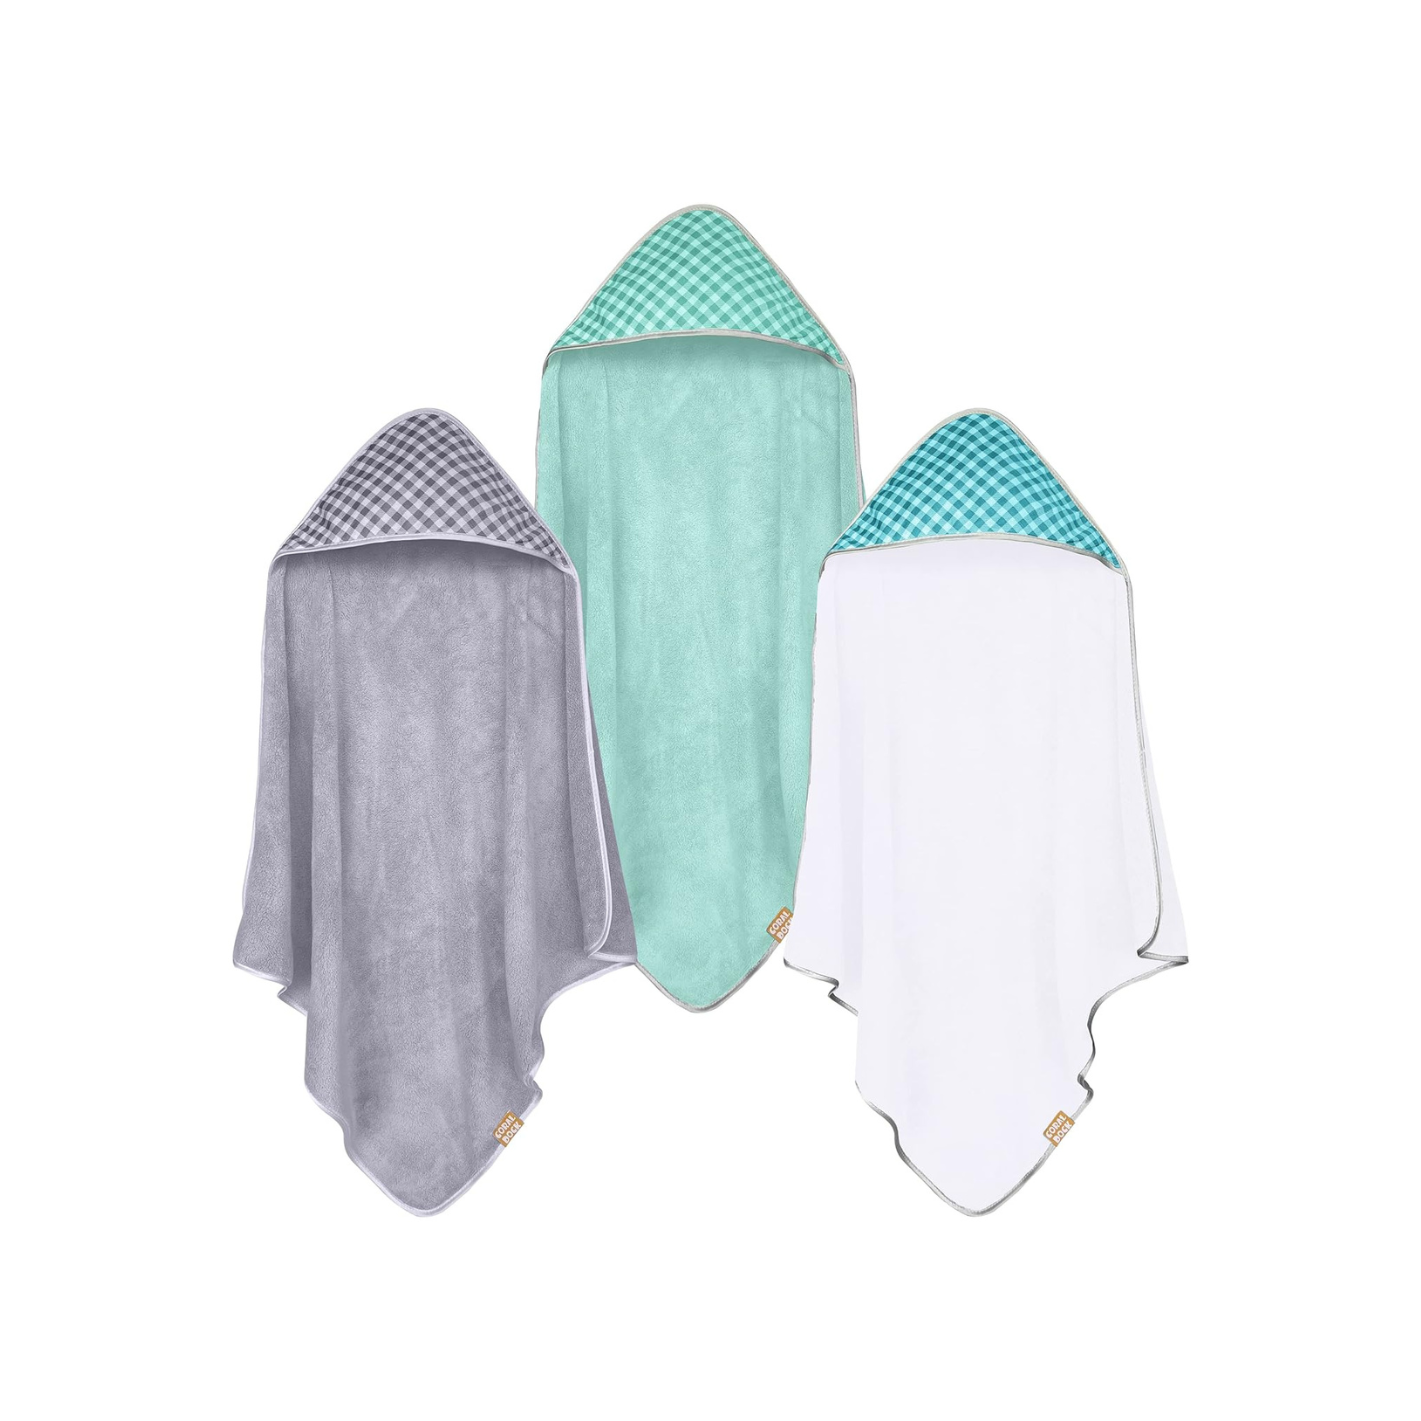 3-Pack Of Baby Hooded Bath Towels